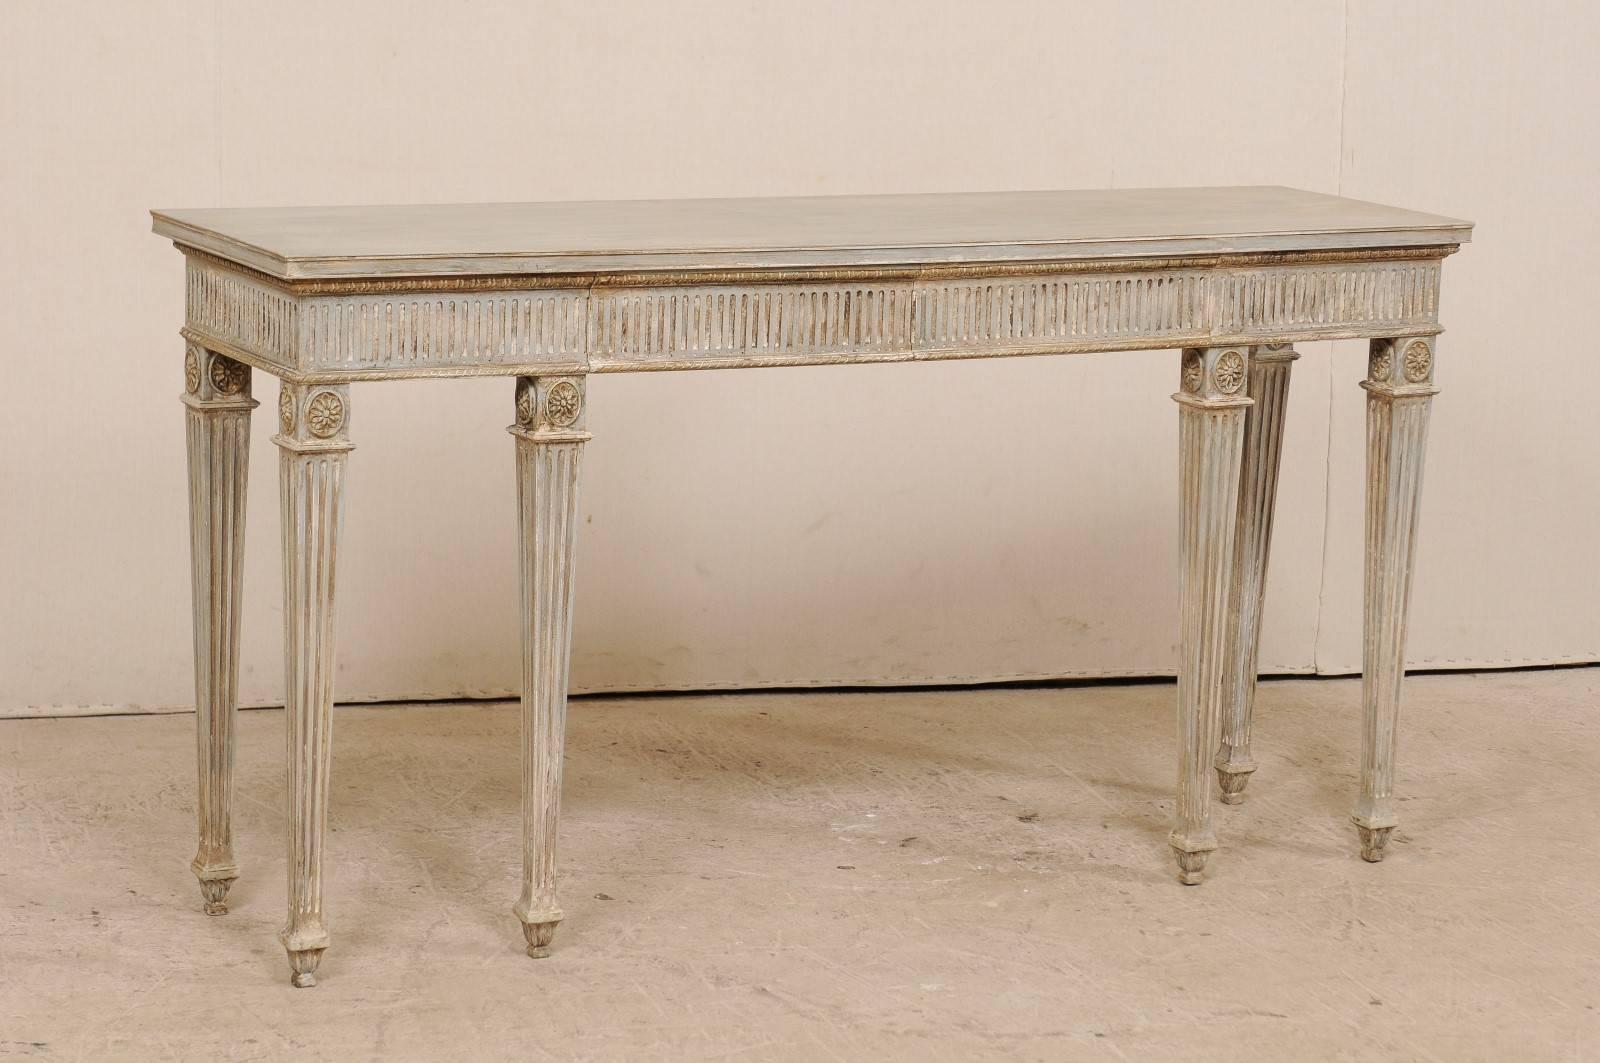 American Gustavian Style Carved Wood Console Table with Fluting Detail & Discreet Drawers